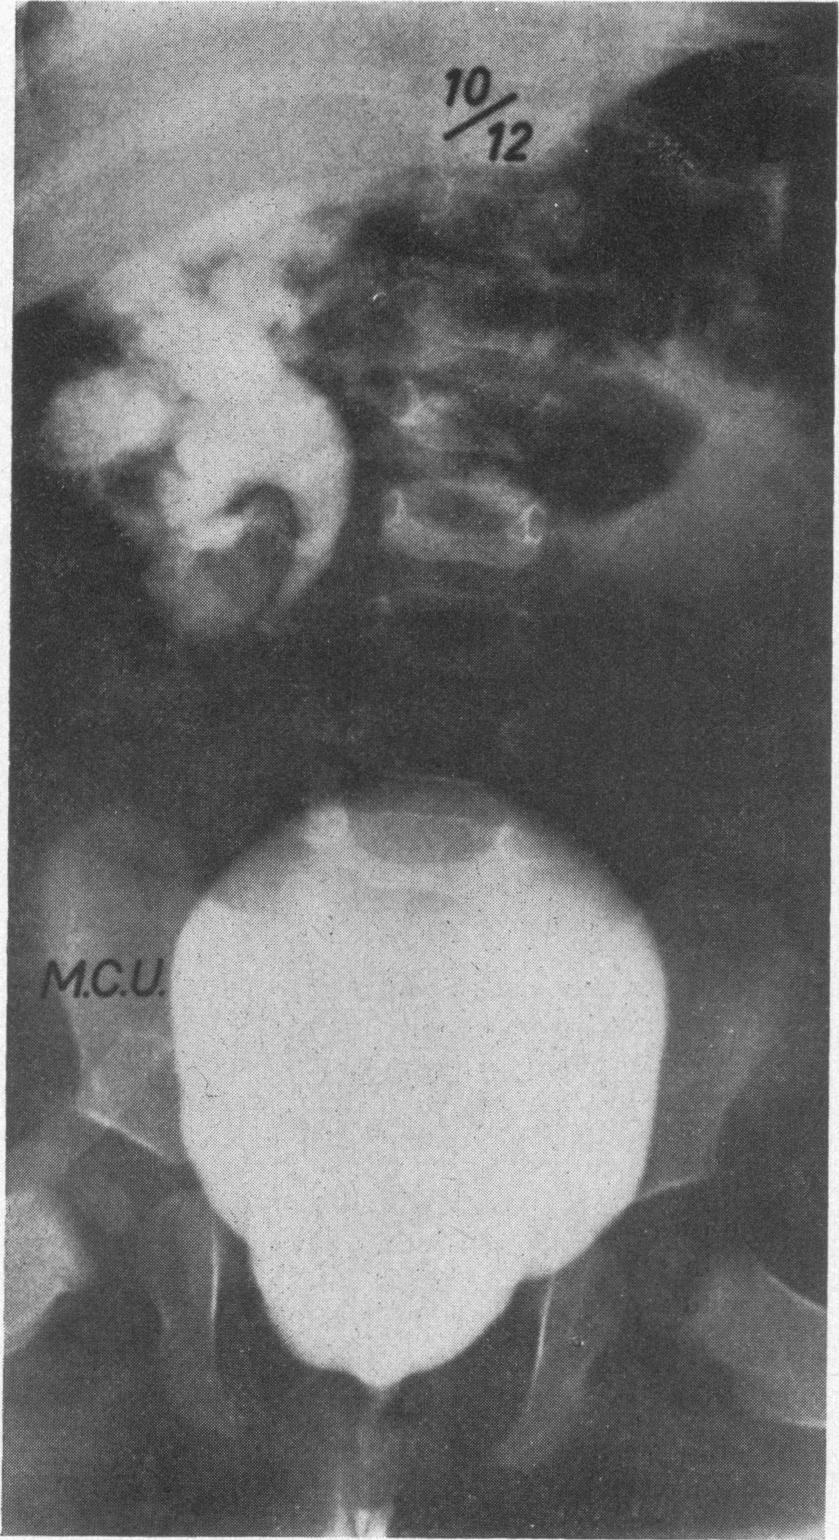 532 Rolleston, Maling, and Hodson the severity of vesicoureteric reflux found in 564 refiuxing ureters during the 386 exaiaions.